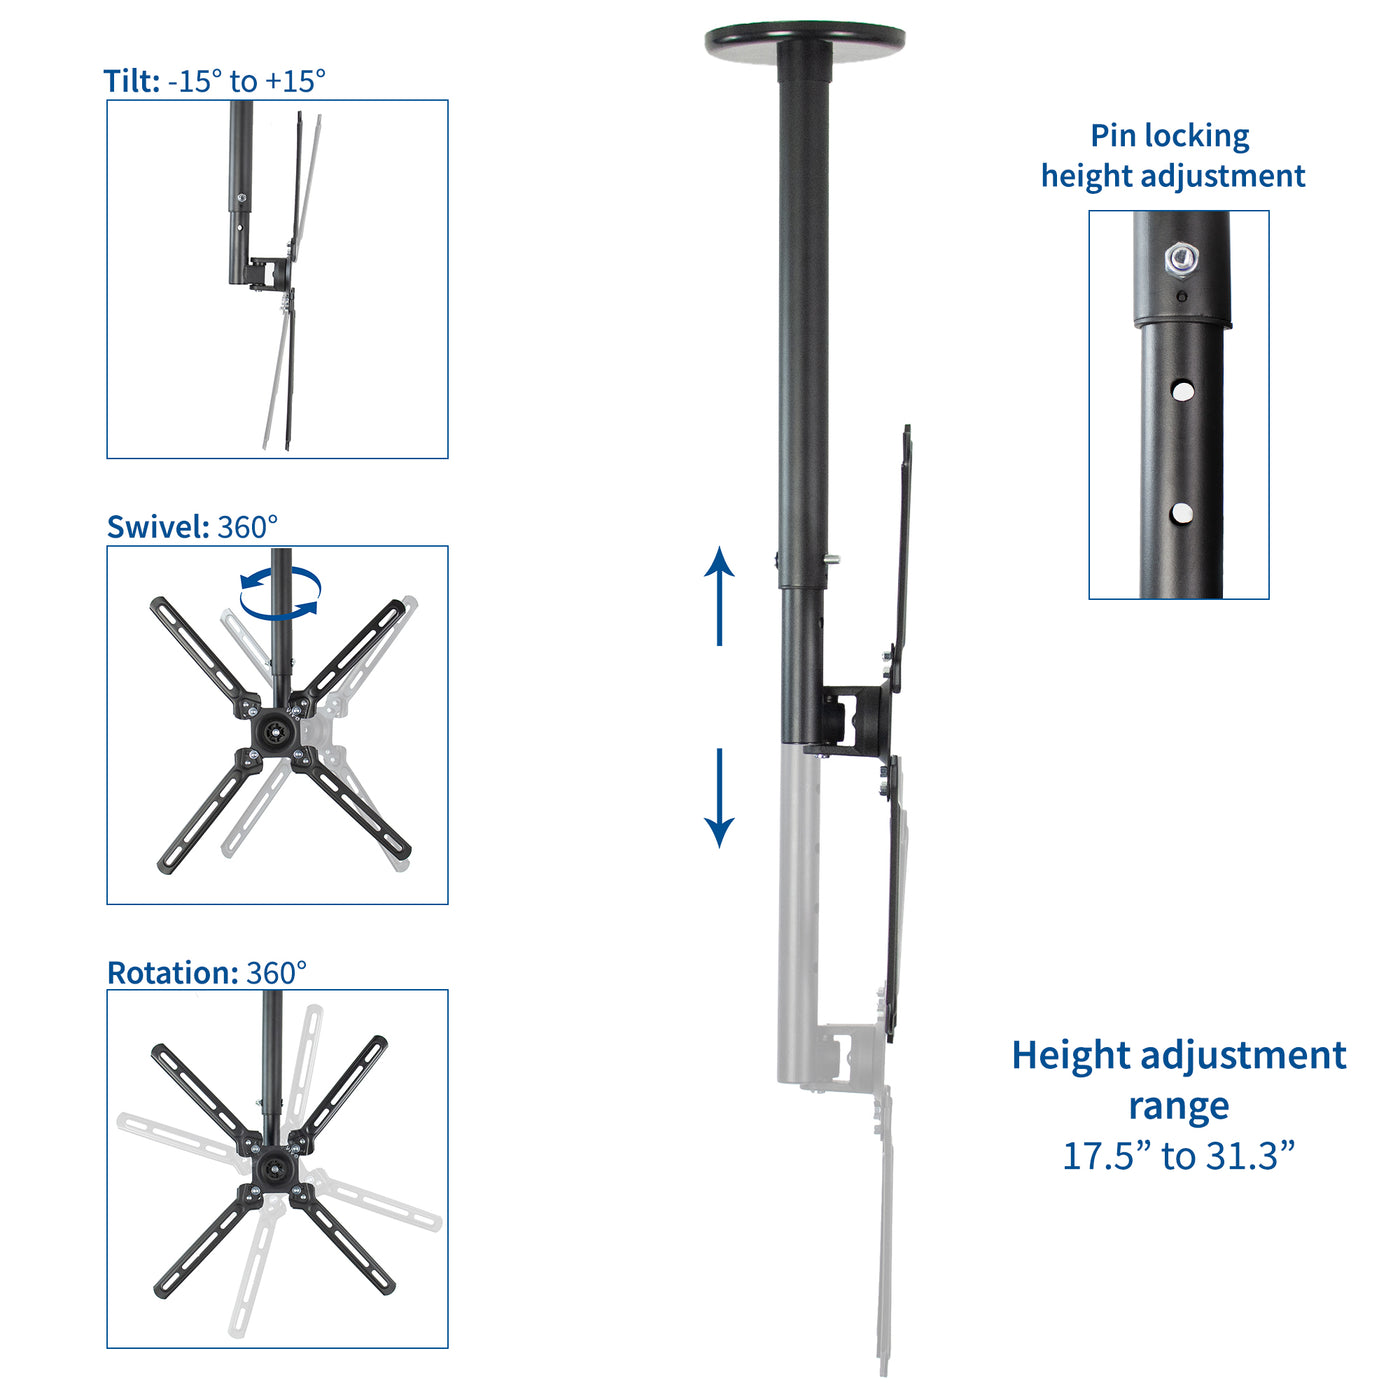 Heavy-duty height adjustable TV ceiling mount with tilt, swivel, and rotation capabilities.